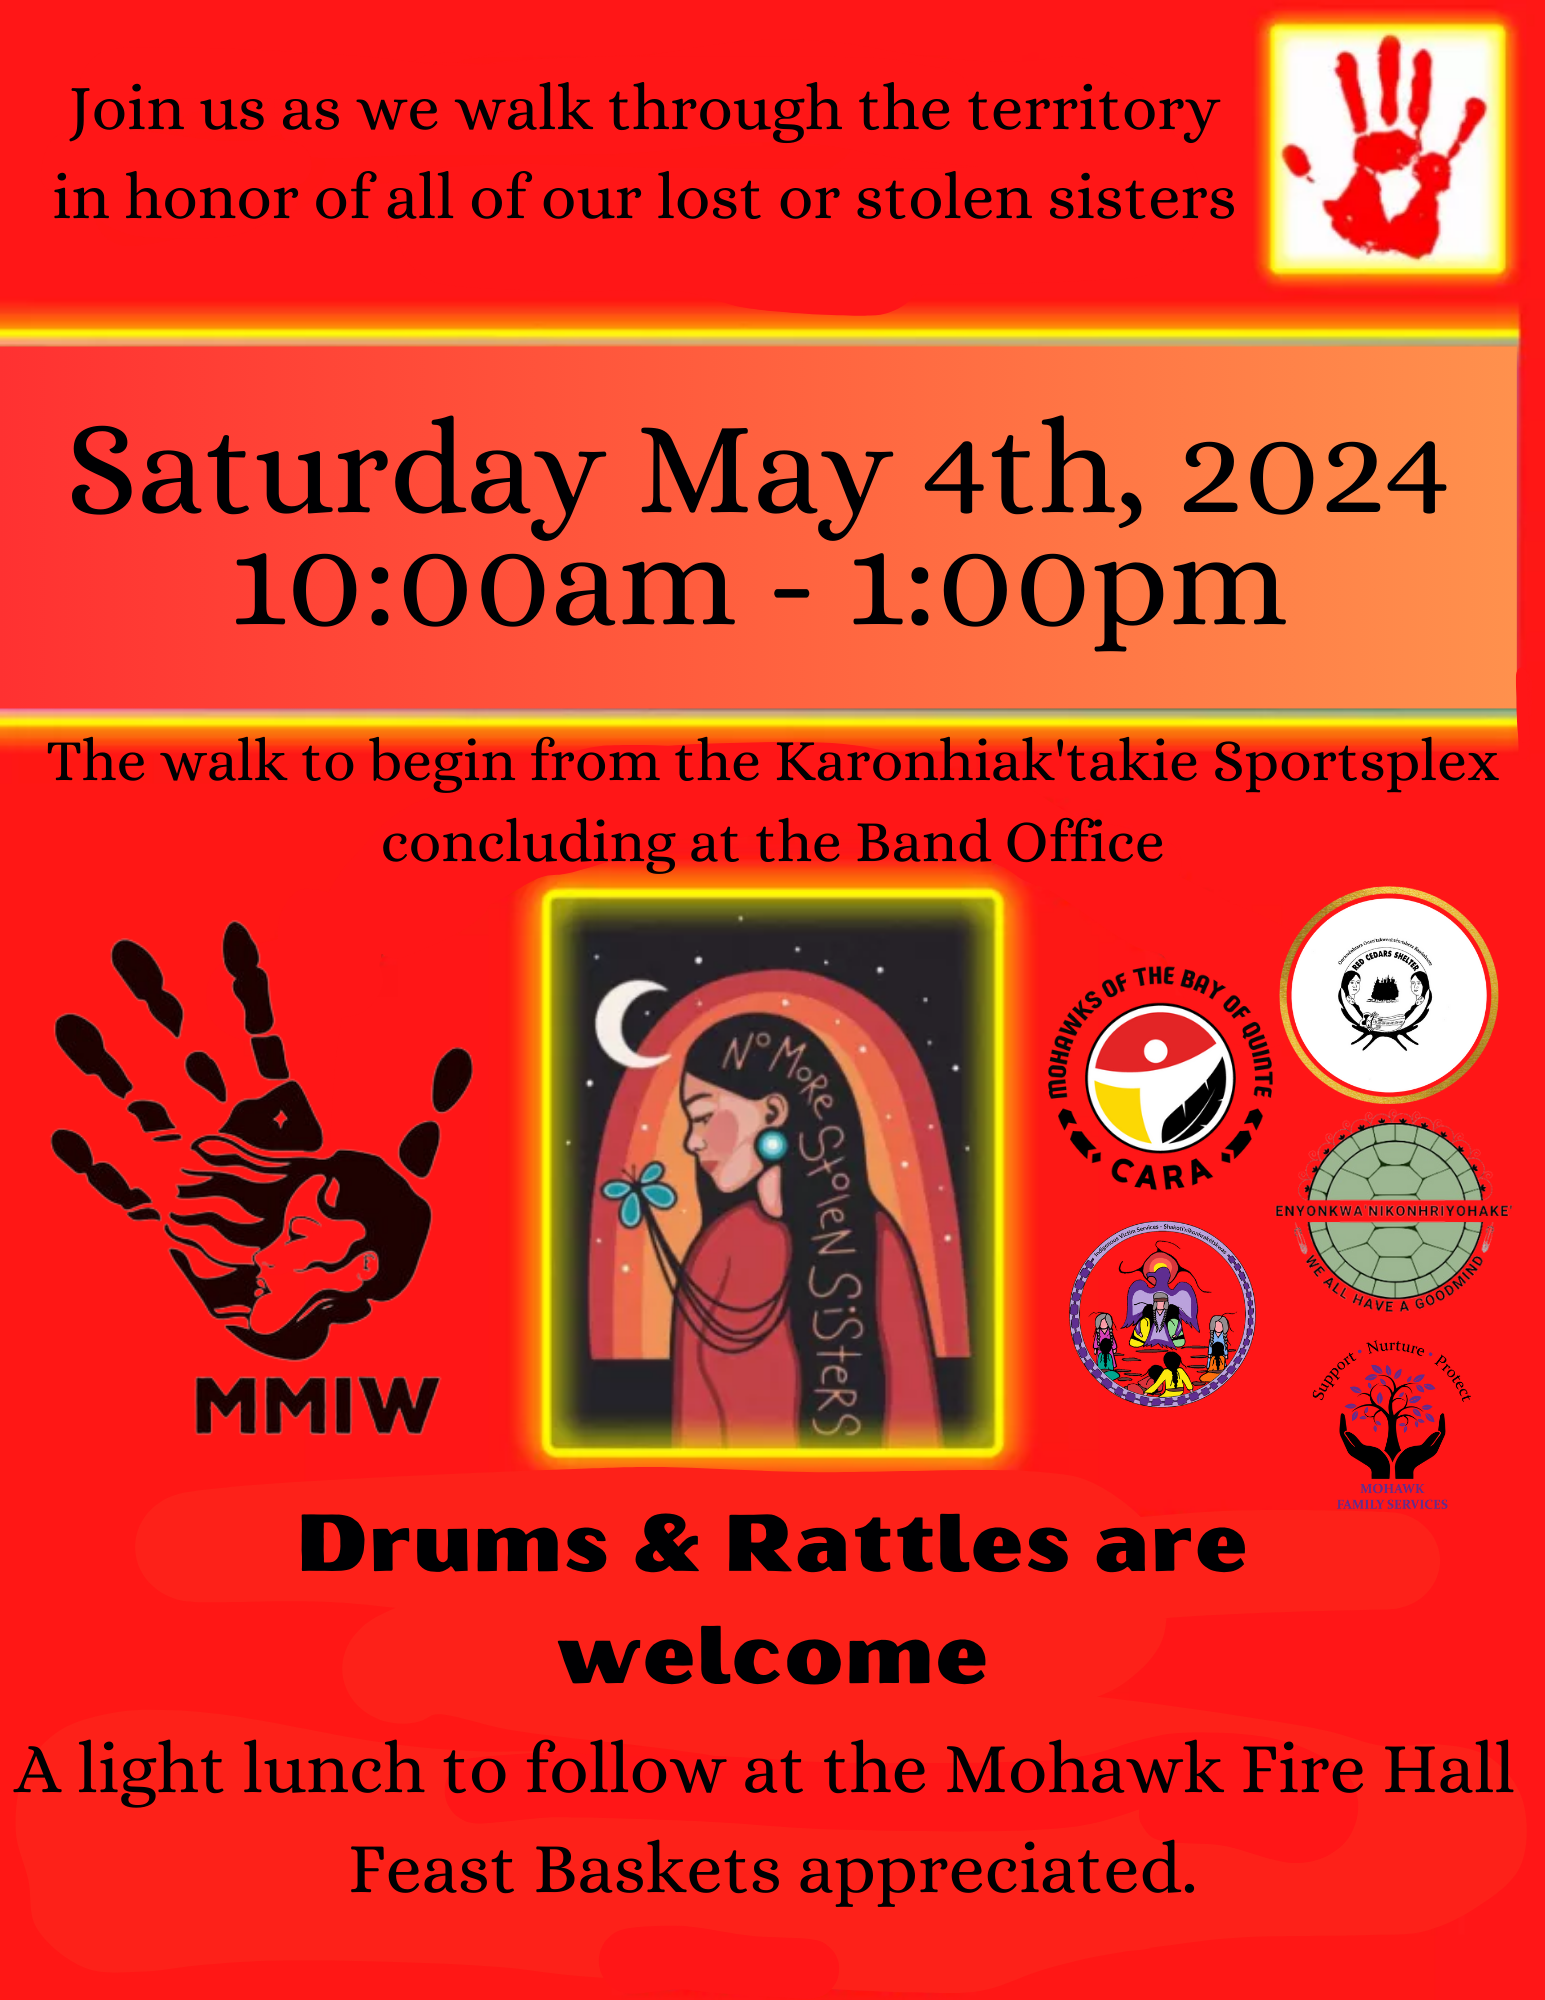 event poster with details mentioned in posting and indigenous imagery.